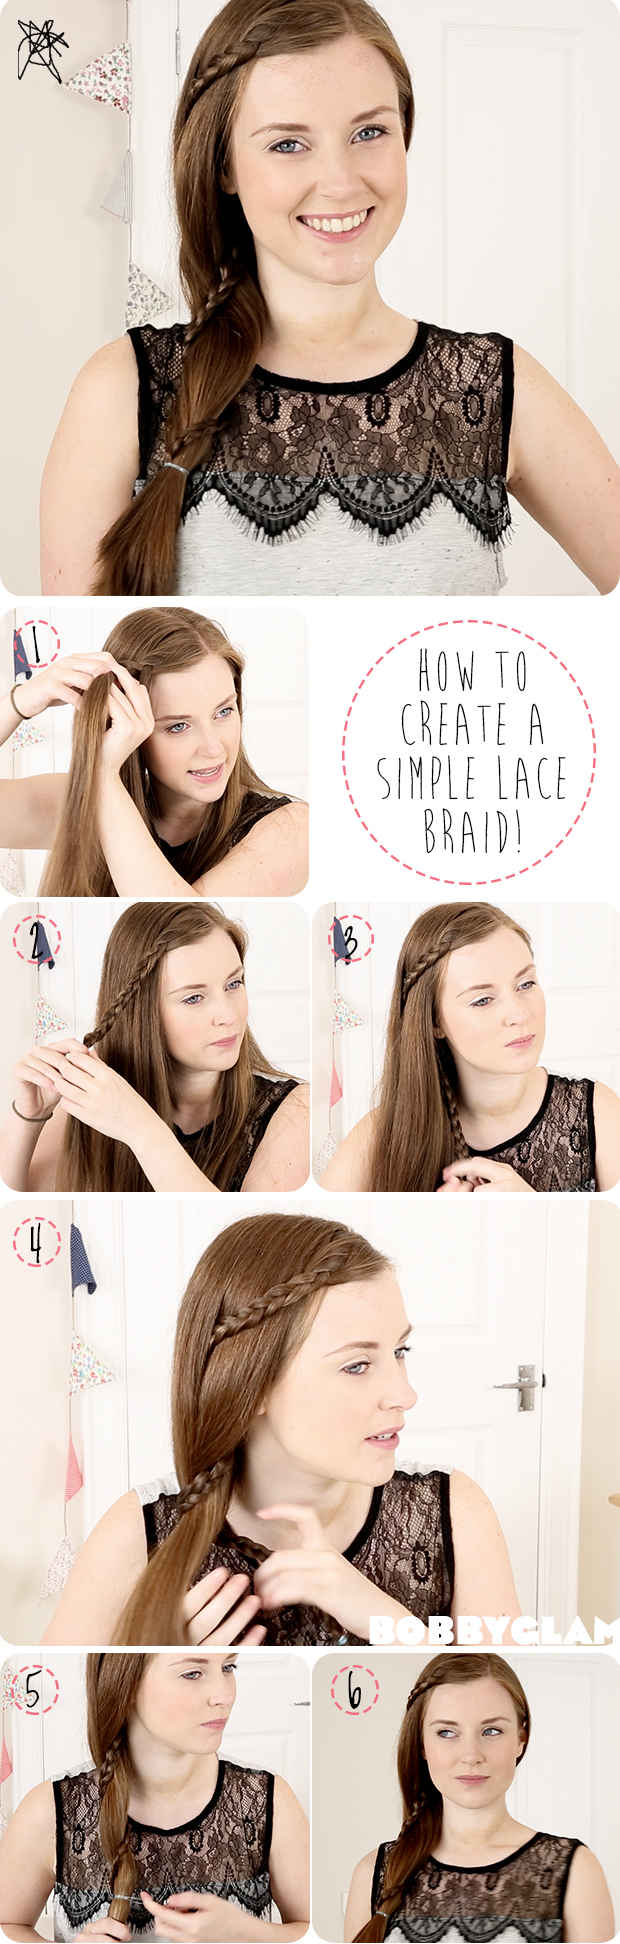 How-to-create-a-simple-lace-braid